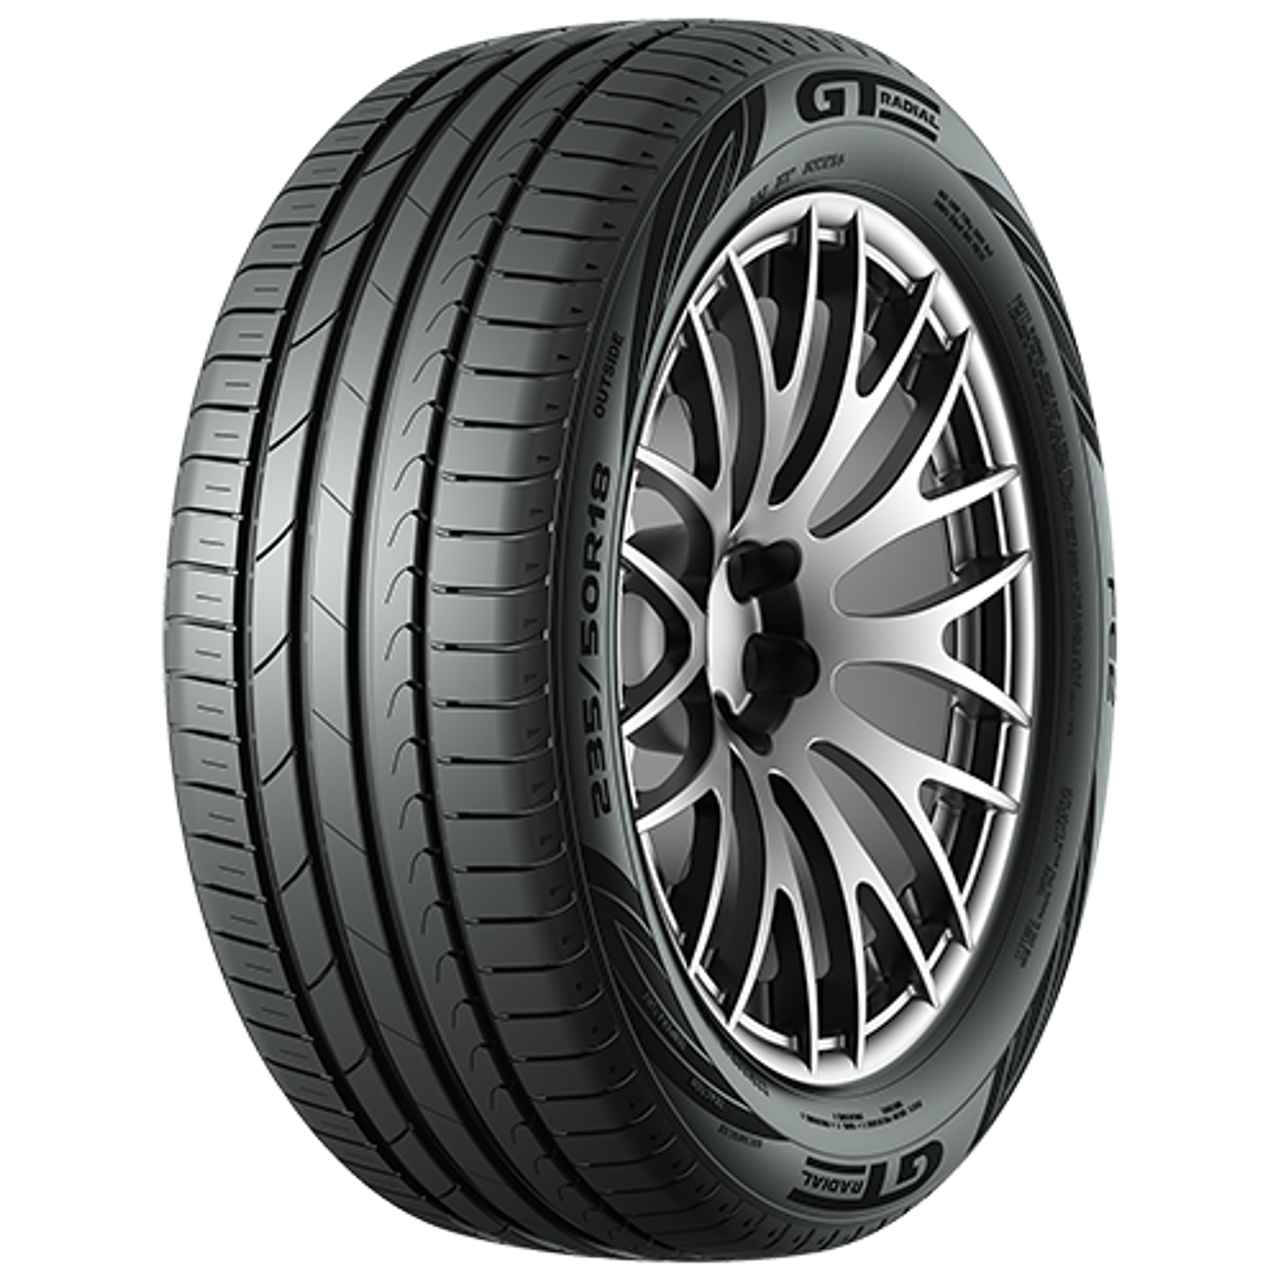 GT-RADIAL FE2 185/60R14 82H BSW